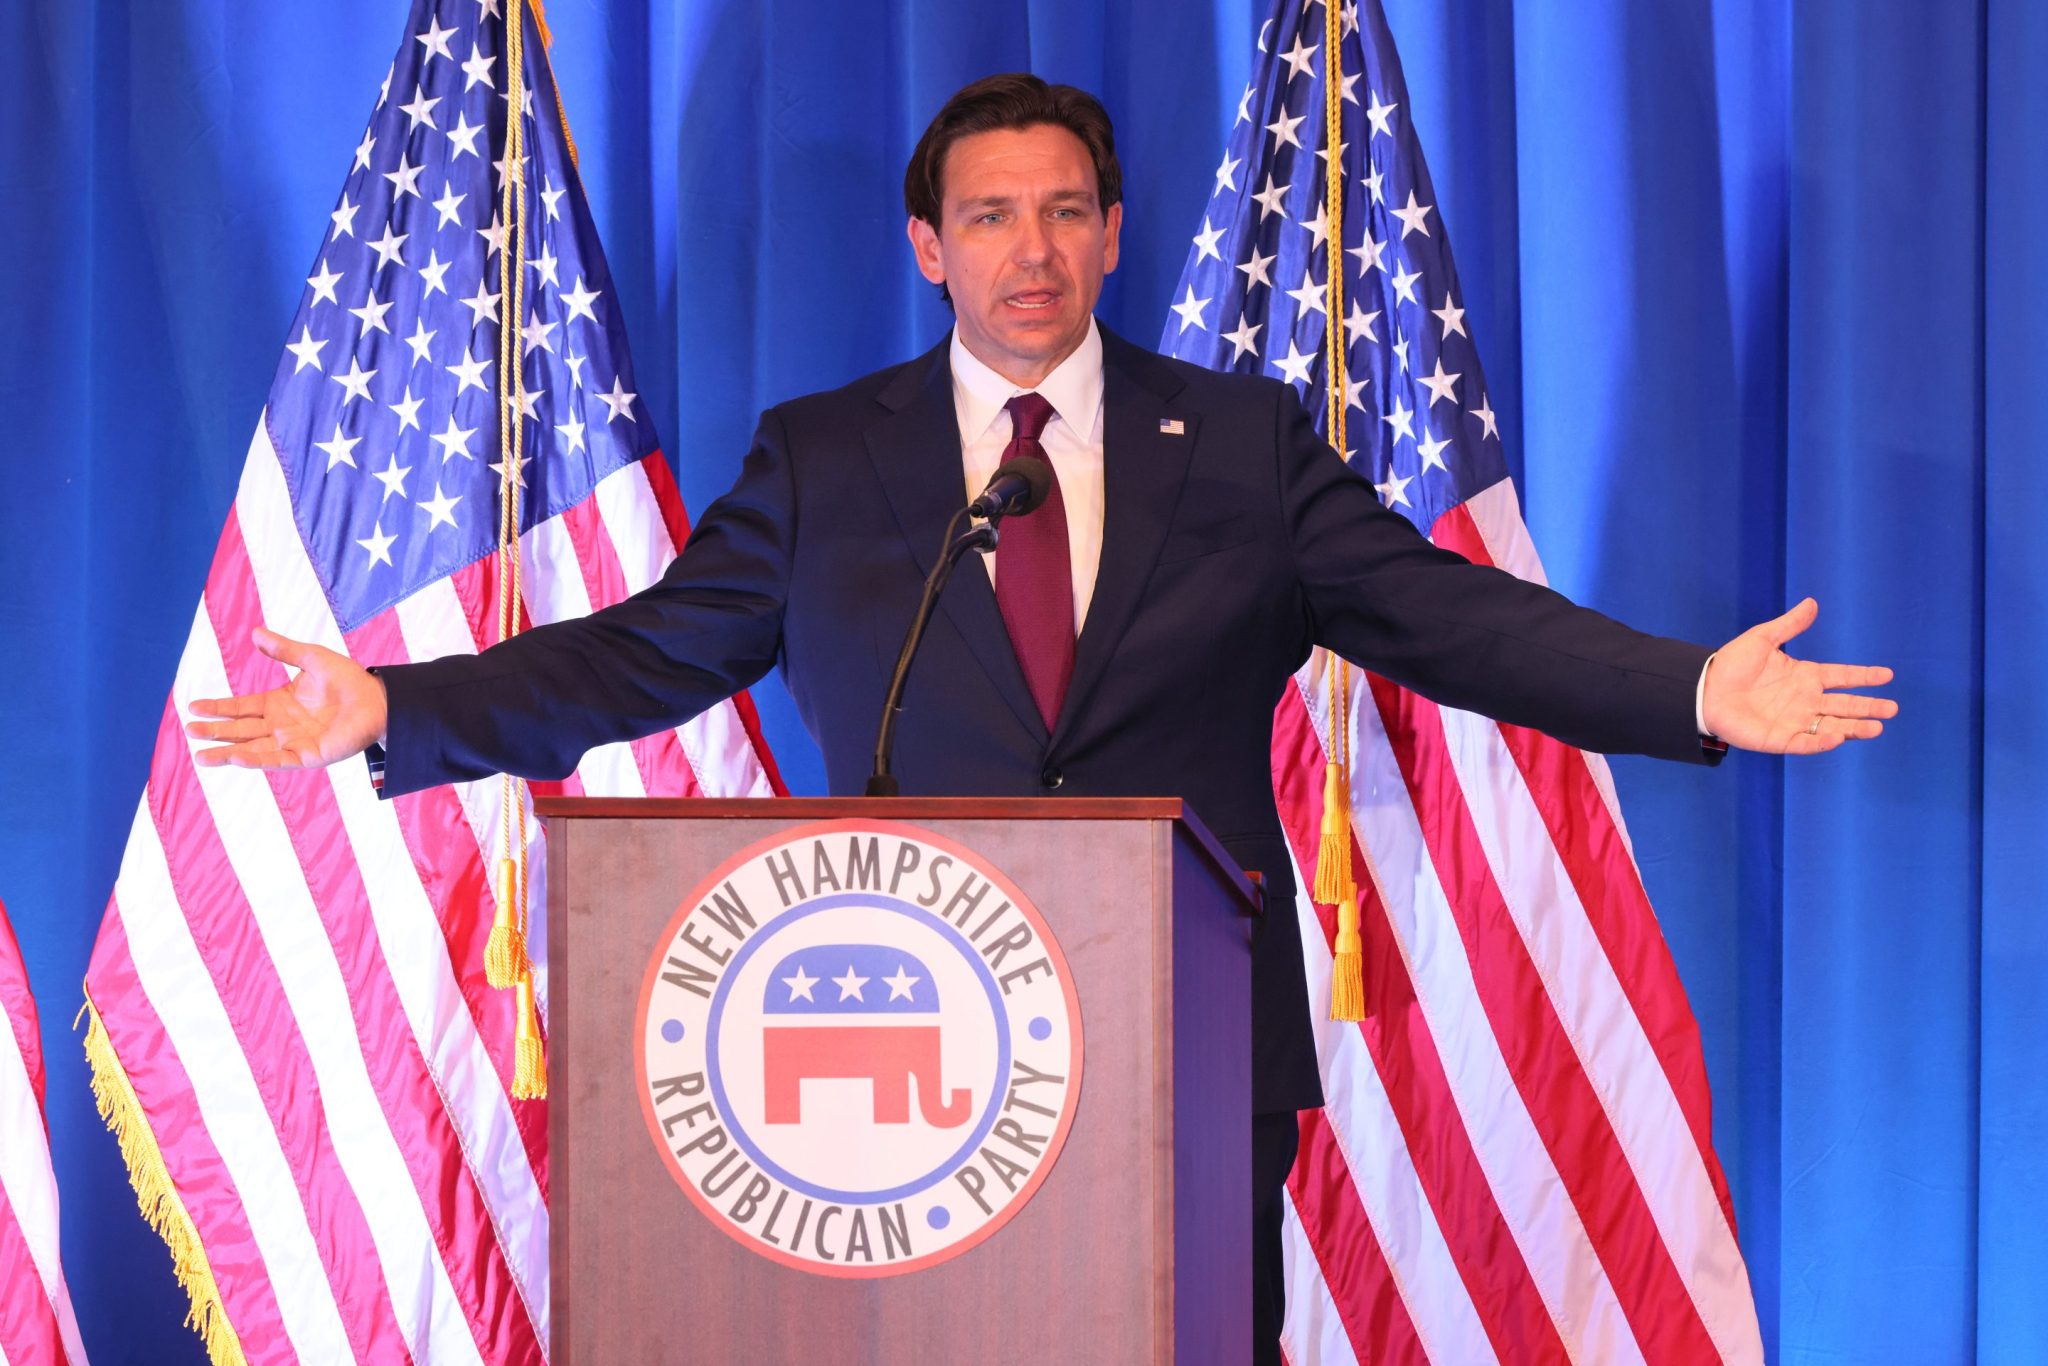 DeSantis Yale frat brothers raised $5.5m for candidate